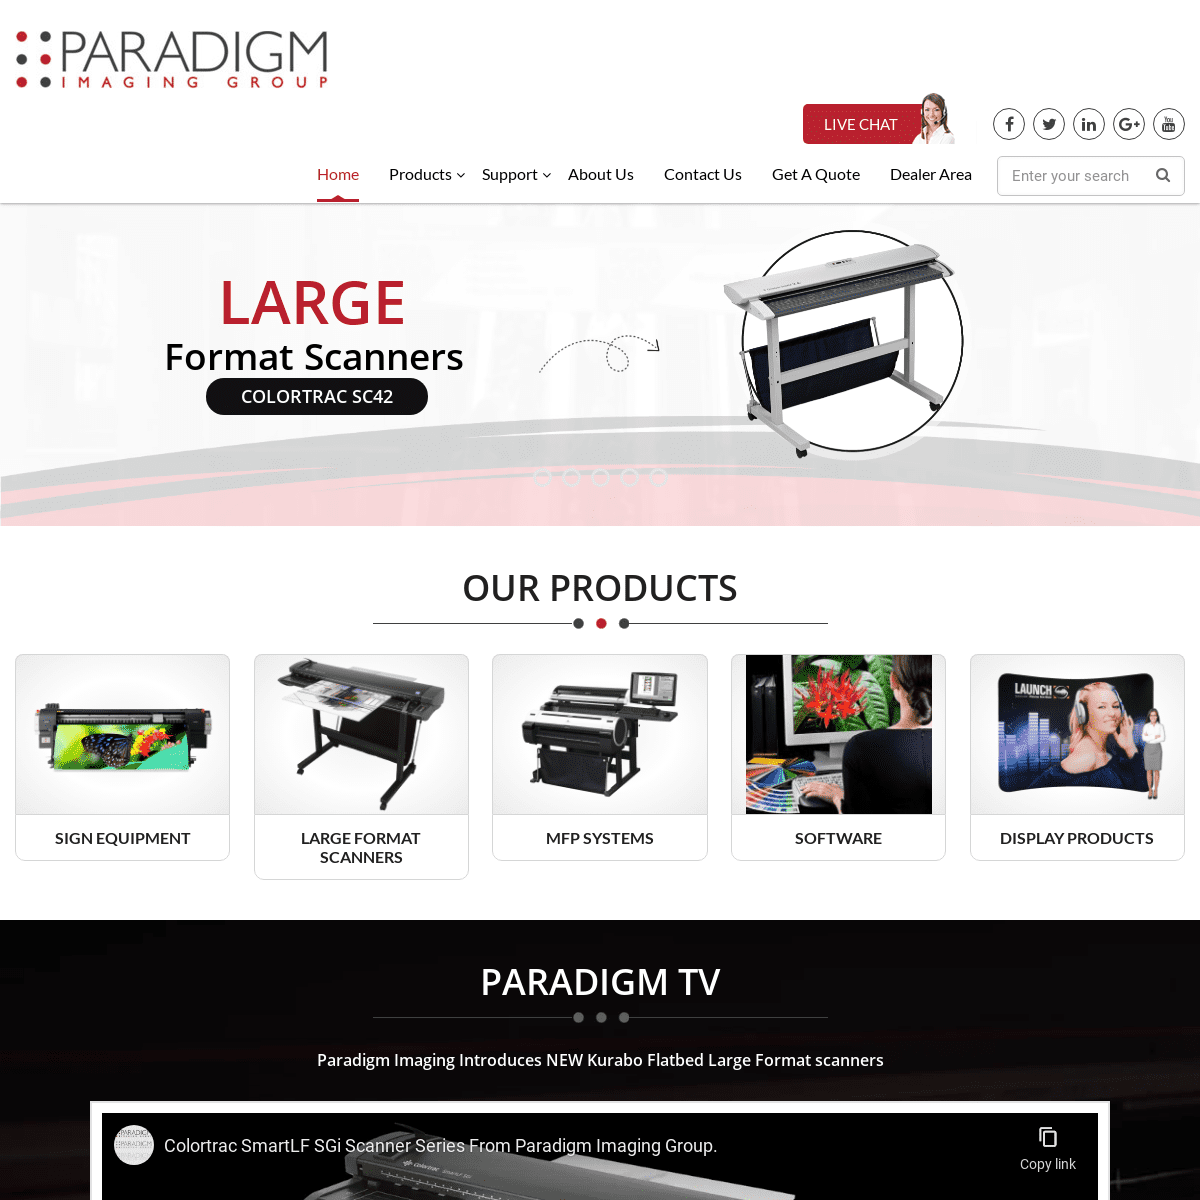 A complete backup of https://paradigmimaging.com